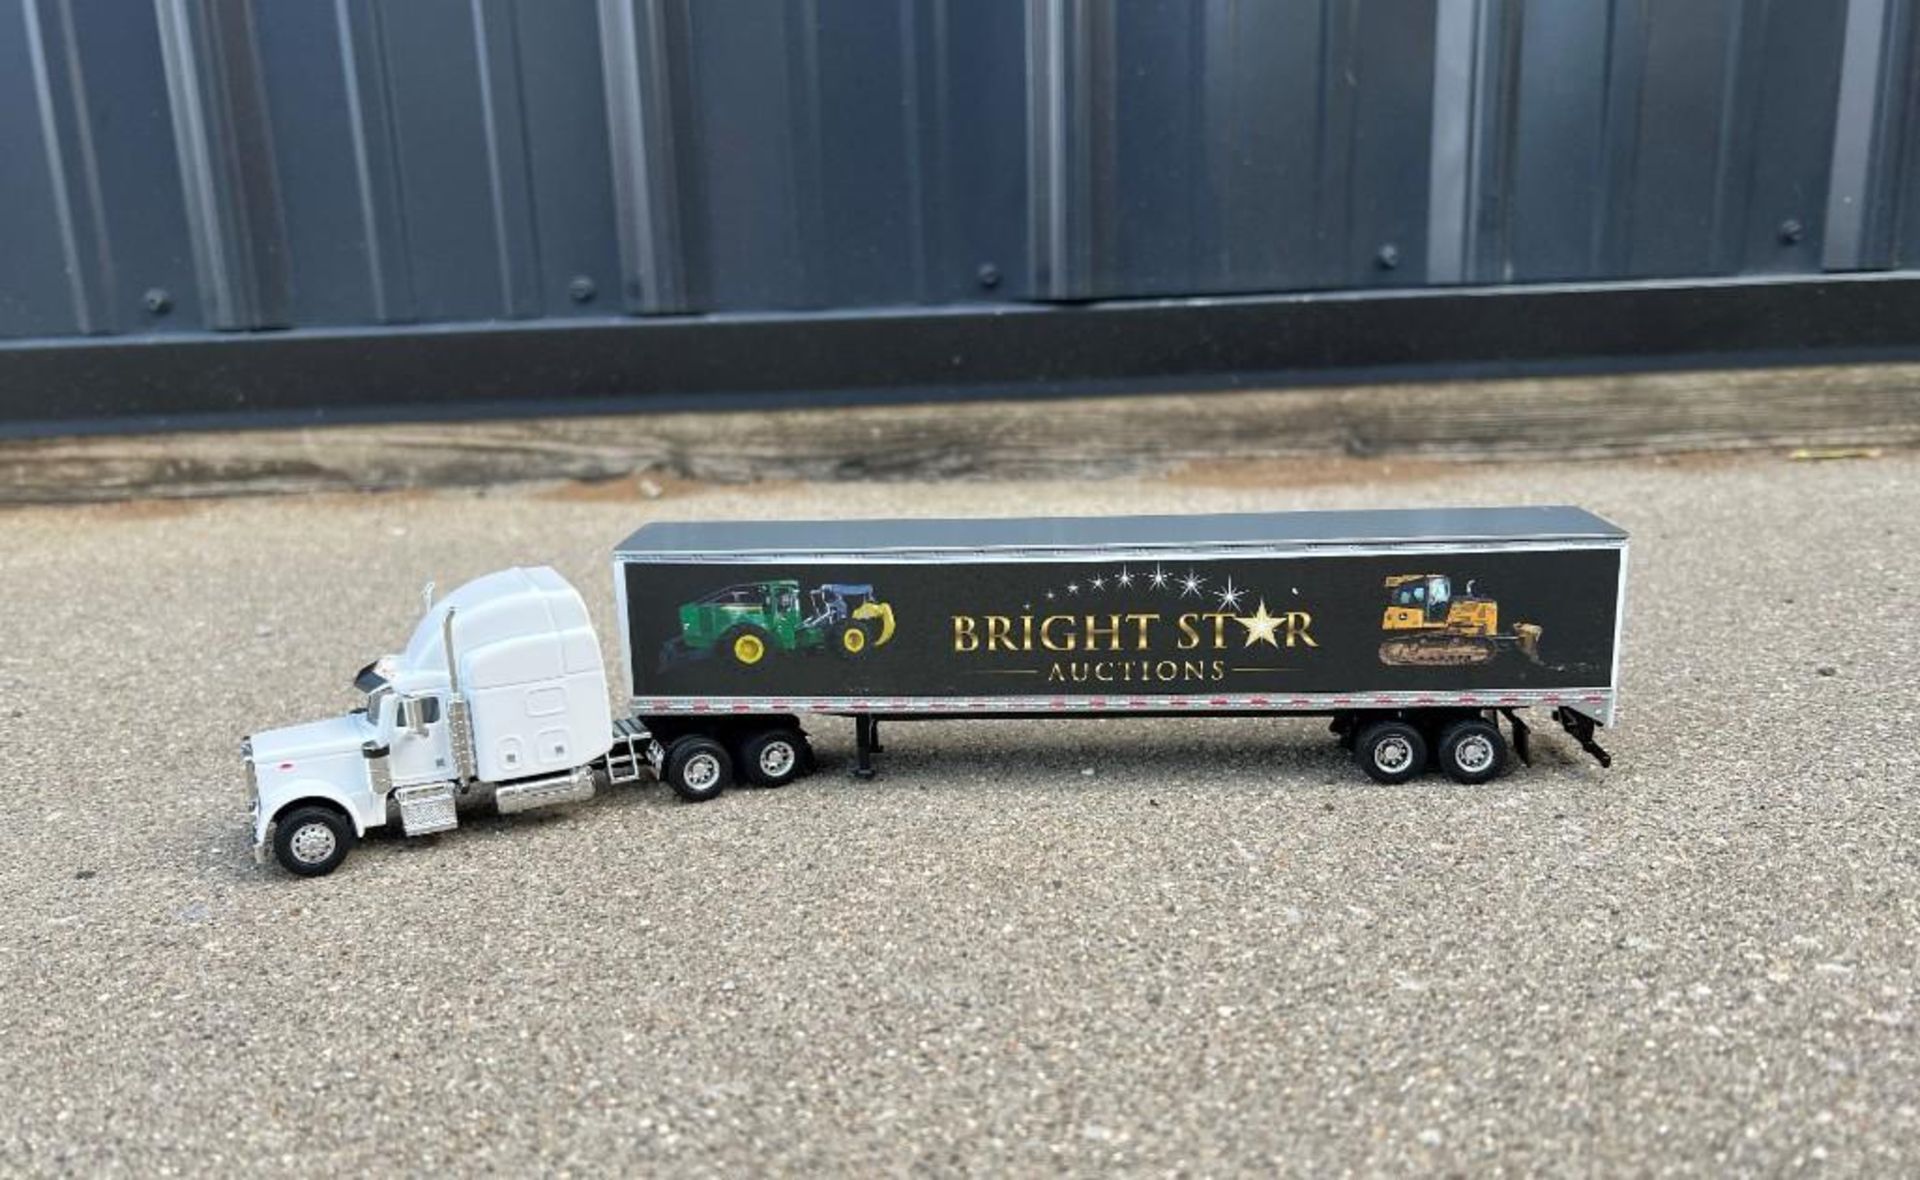 Bright Star Auctions Die-Cast Metal 1:64 Scale Truck Replica - Image 4 of 8